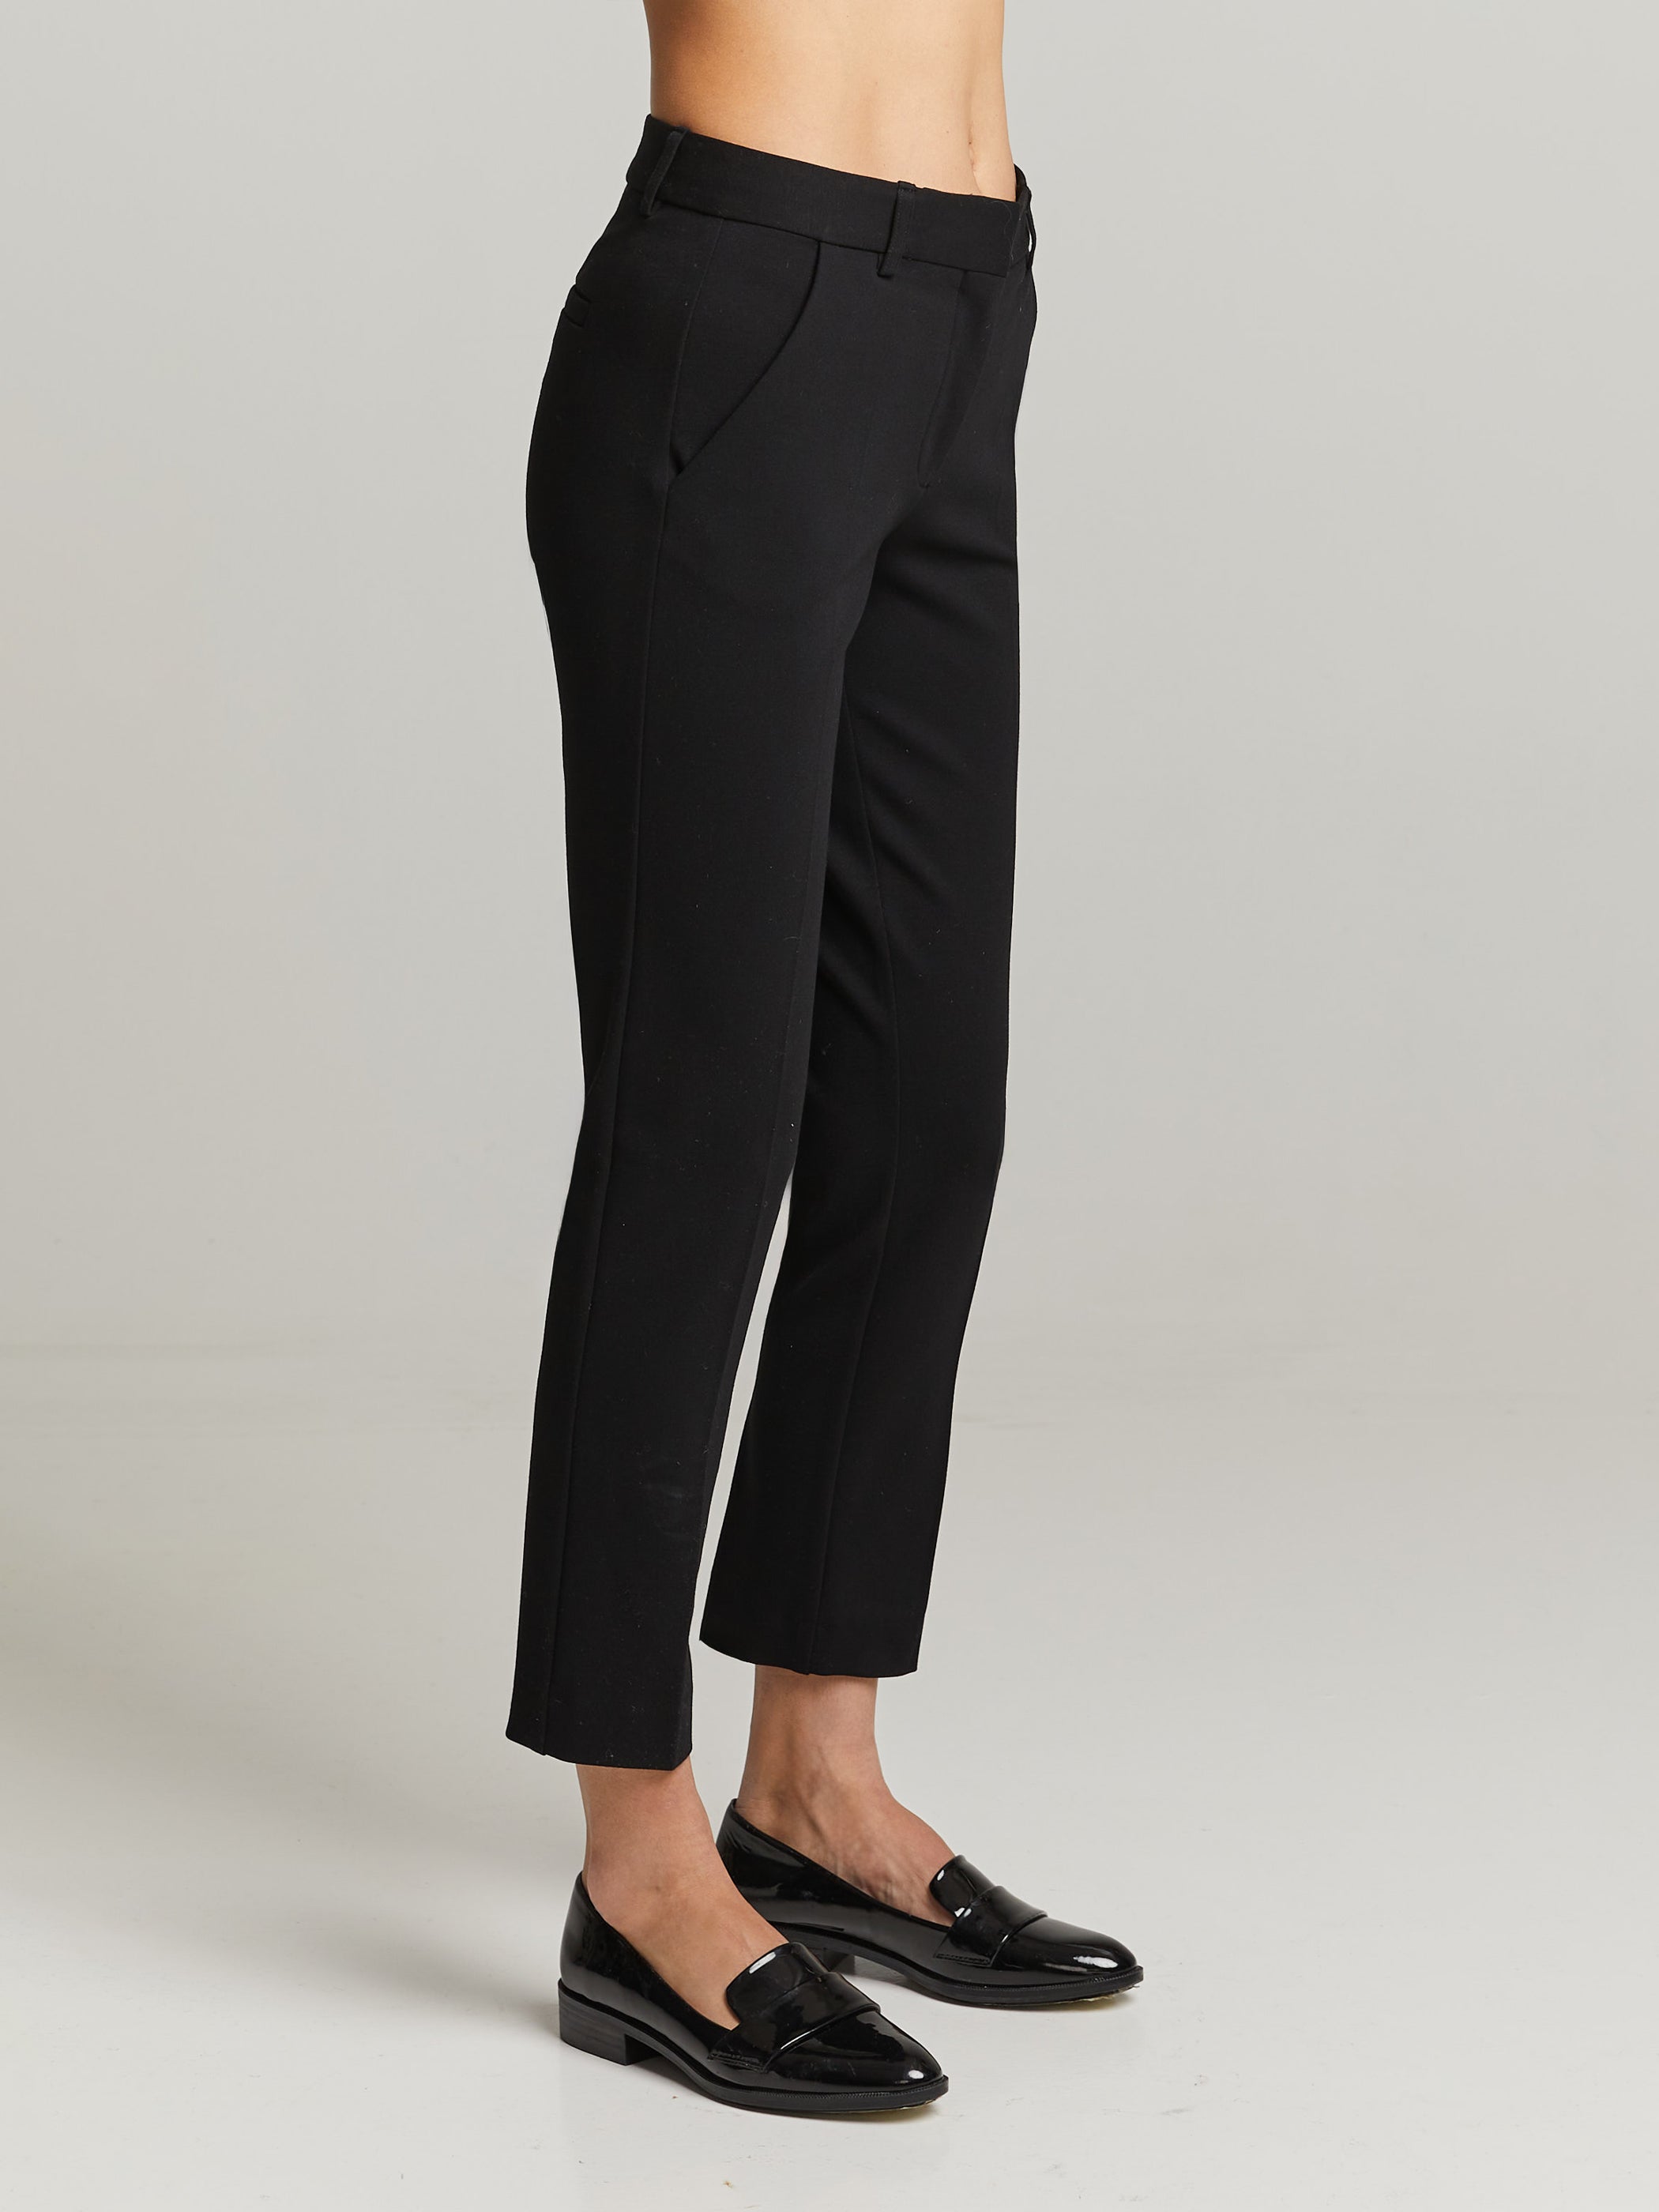 Jersey trousers with zips - Black - Ladies | H&M IN